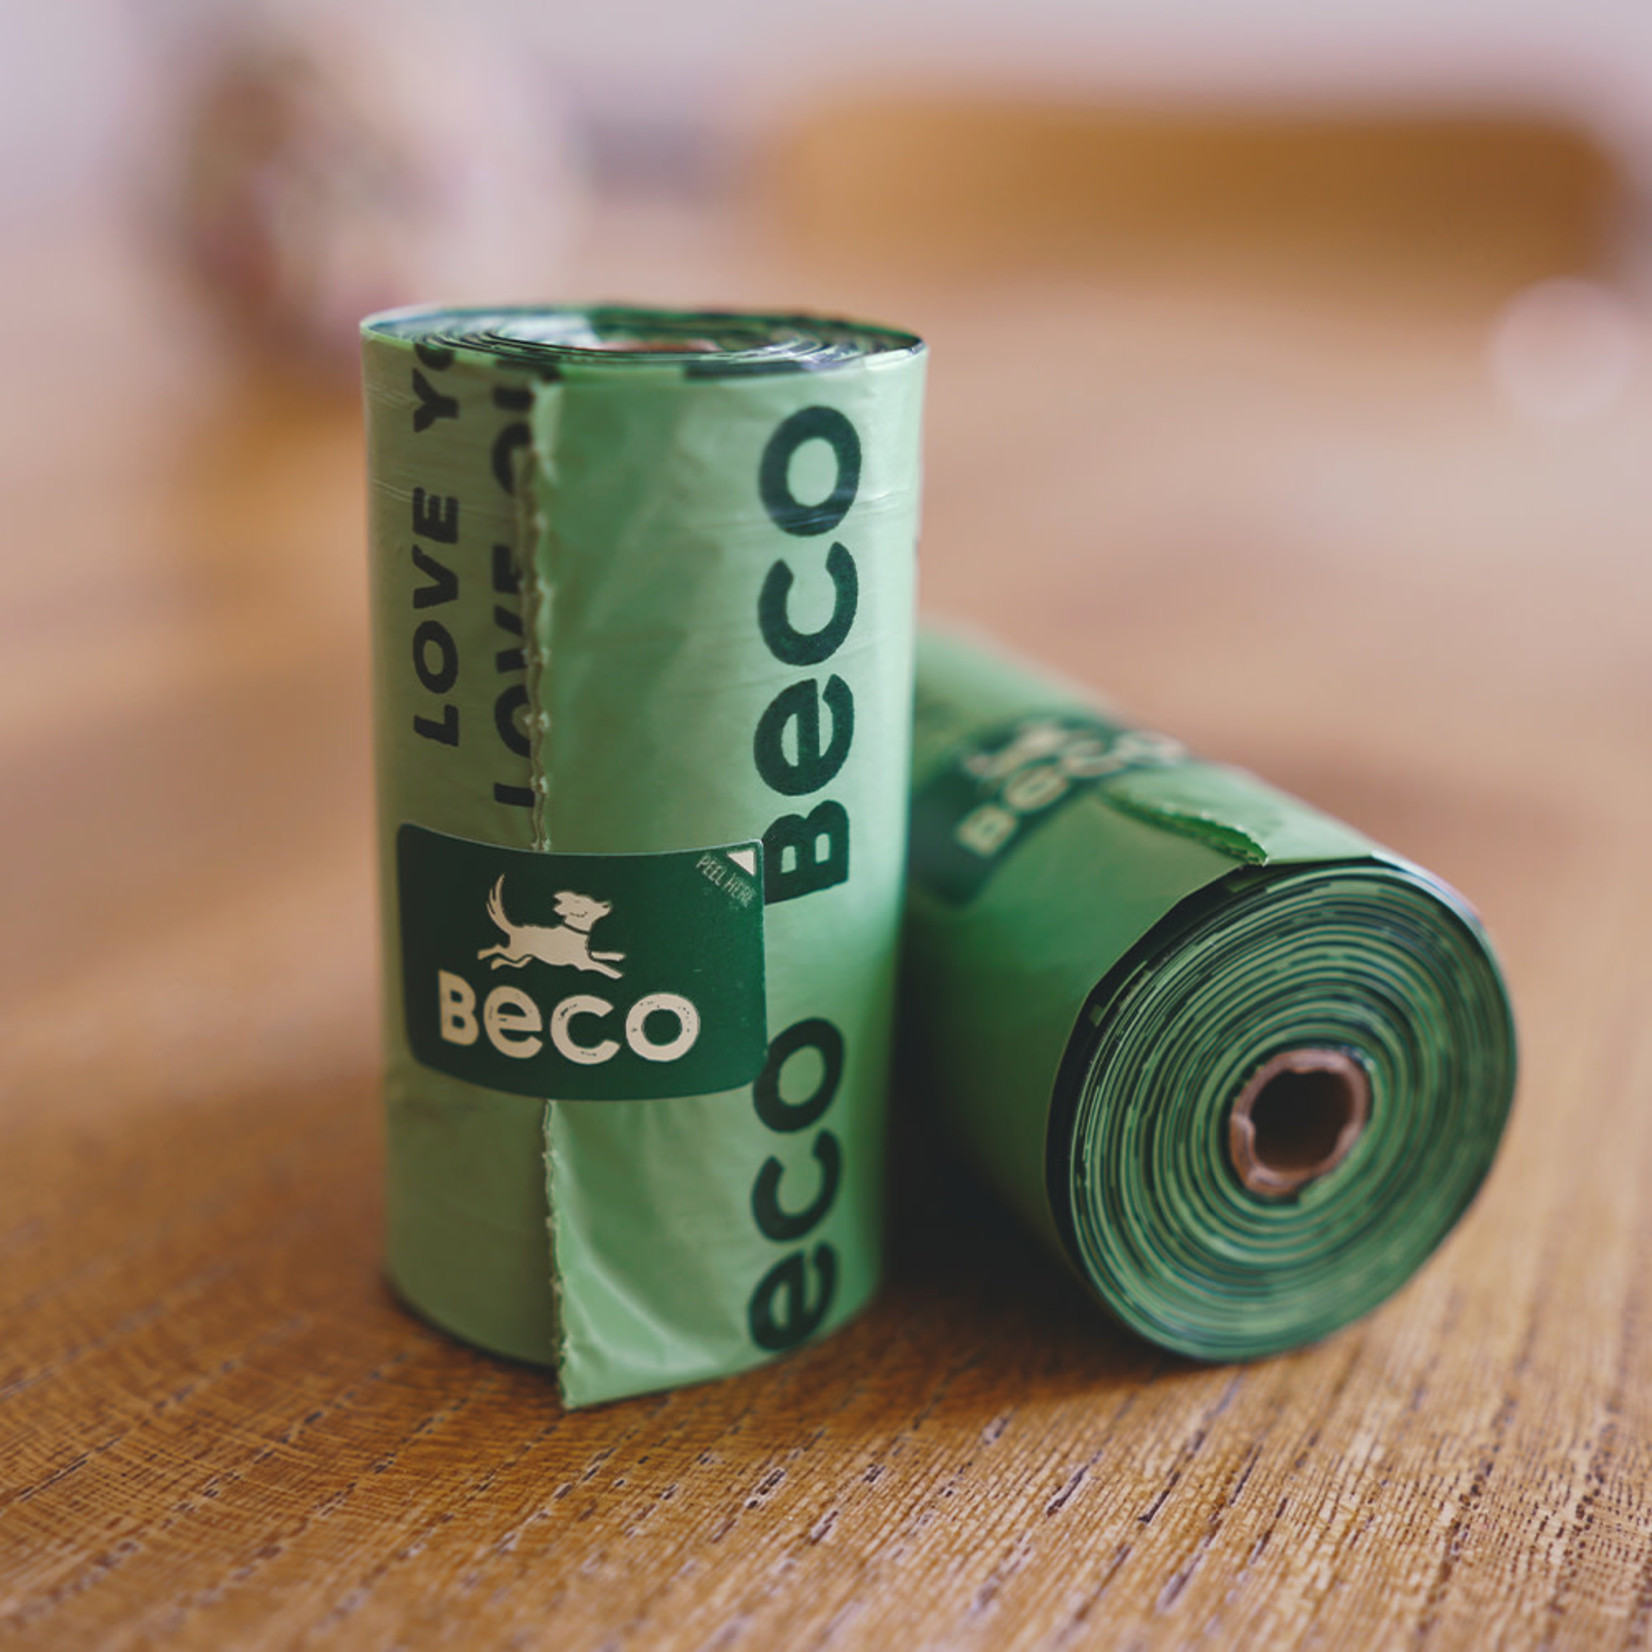 Beco Eco-Friendly Unscented Degradable Poop Bags, 270 bags